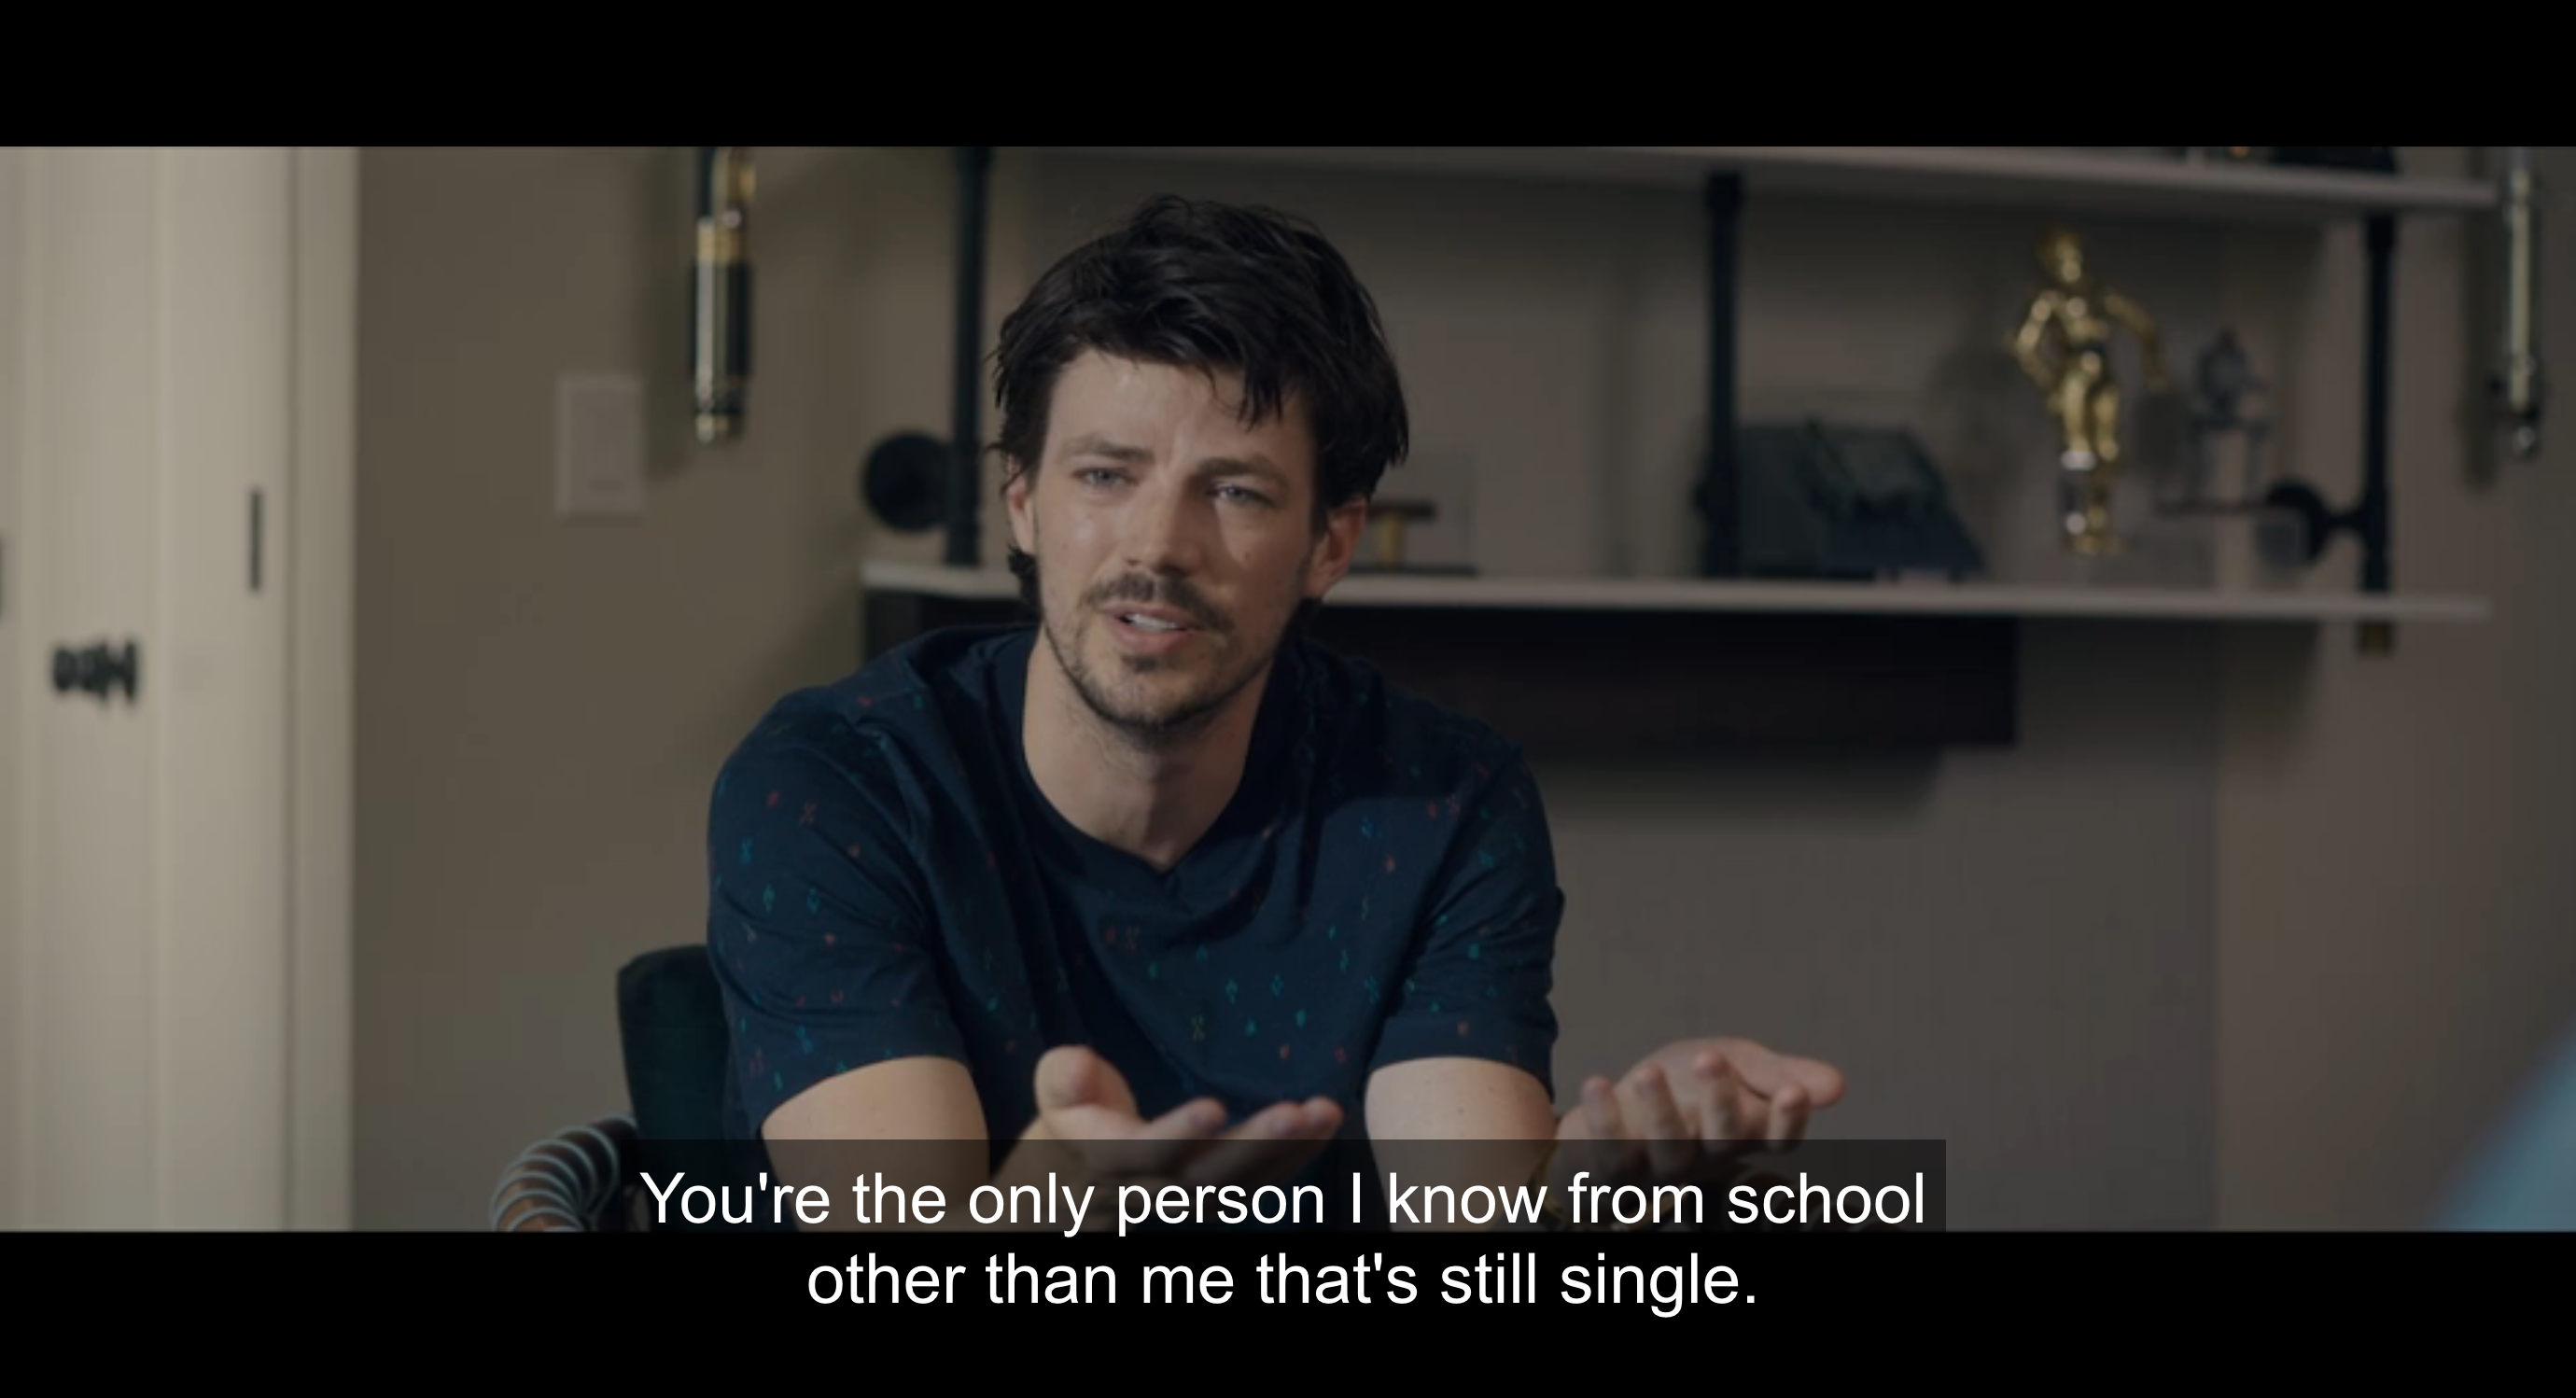 grant gustin says: you&#x27;re the only person I know from school other than me that&#x27;s still single